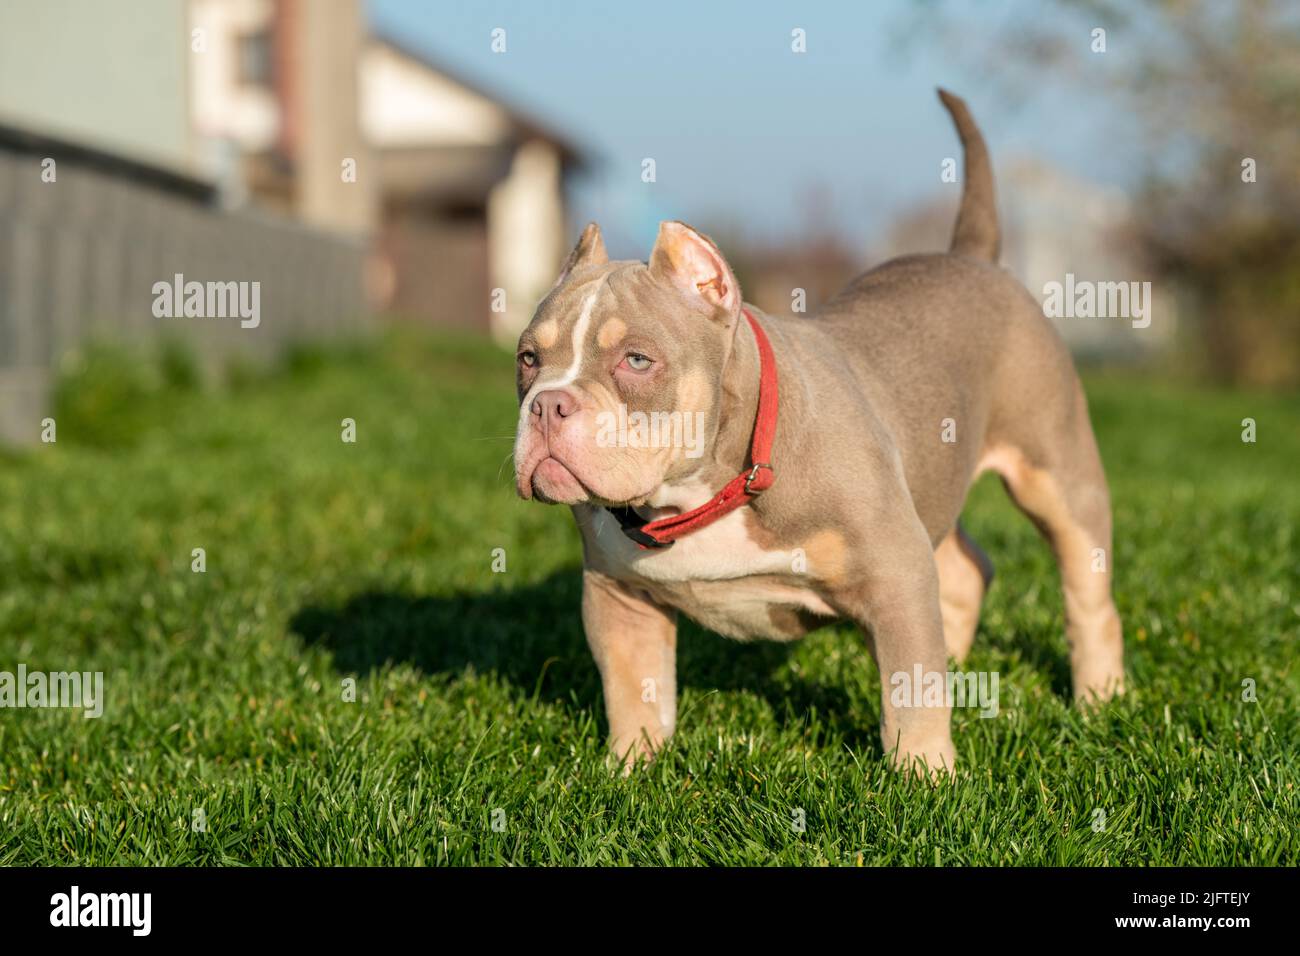 A pocket male American Bully puppy dog sitting on grass Stock Photo - Alamy